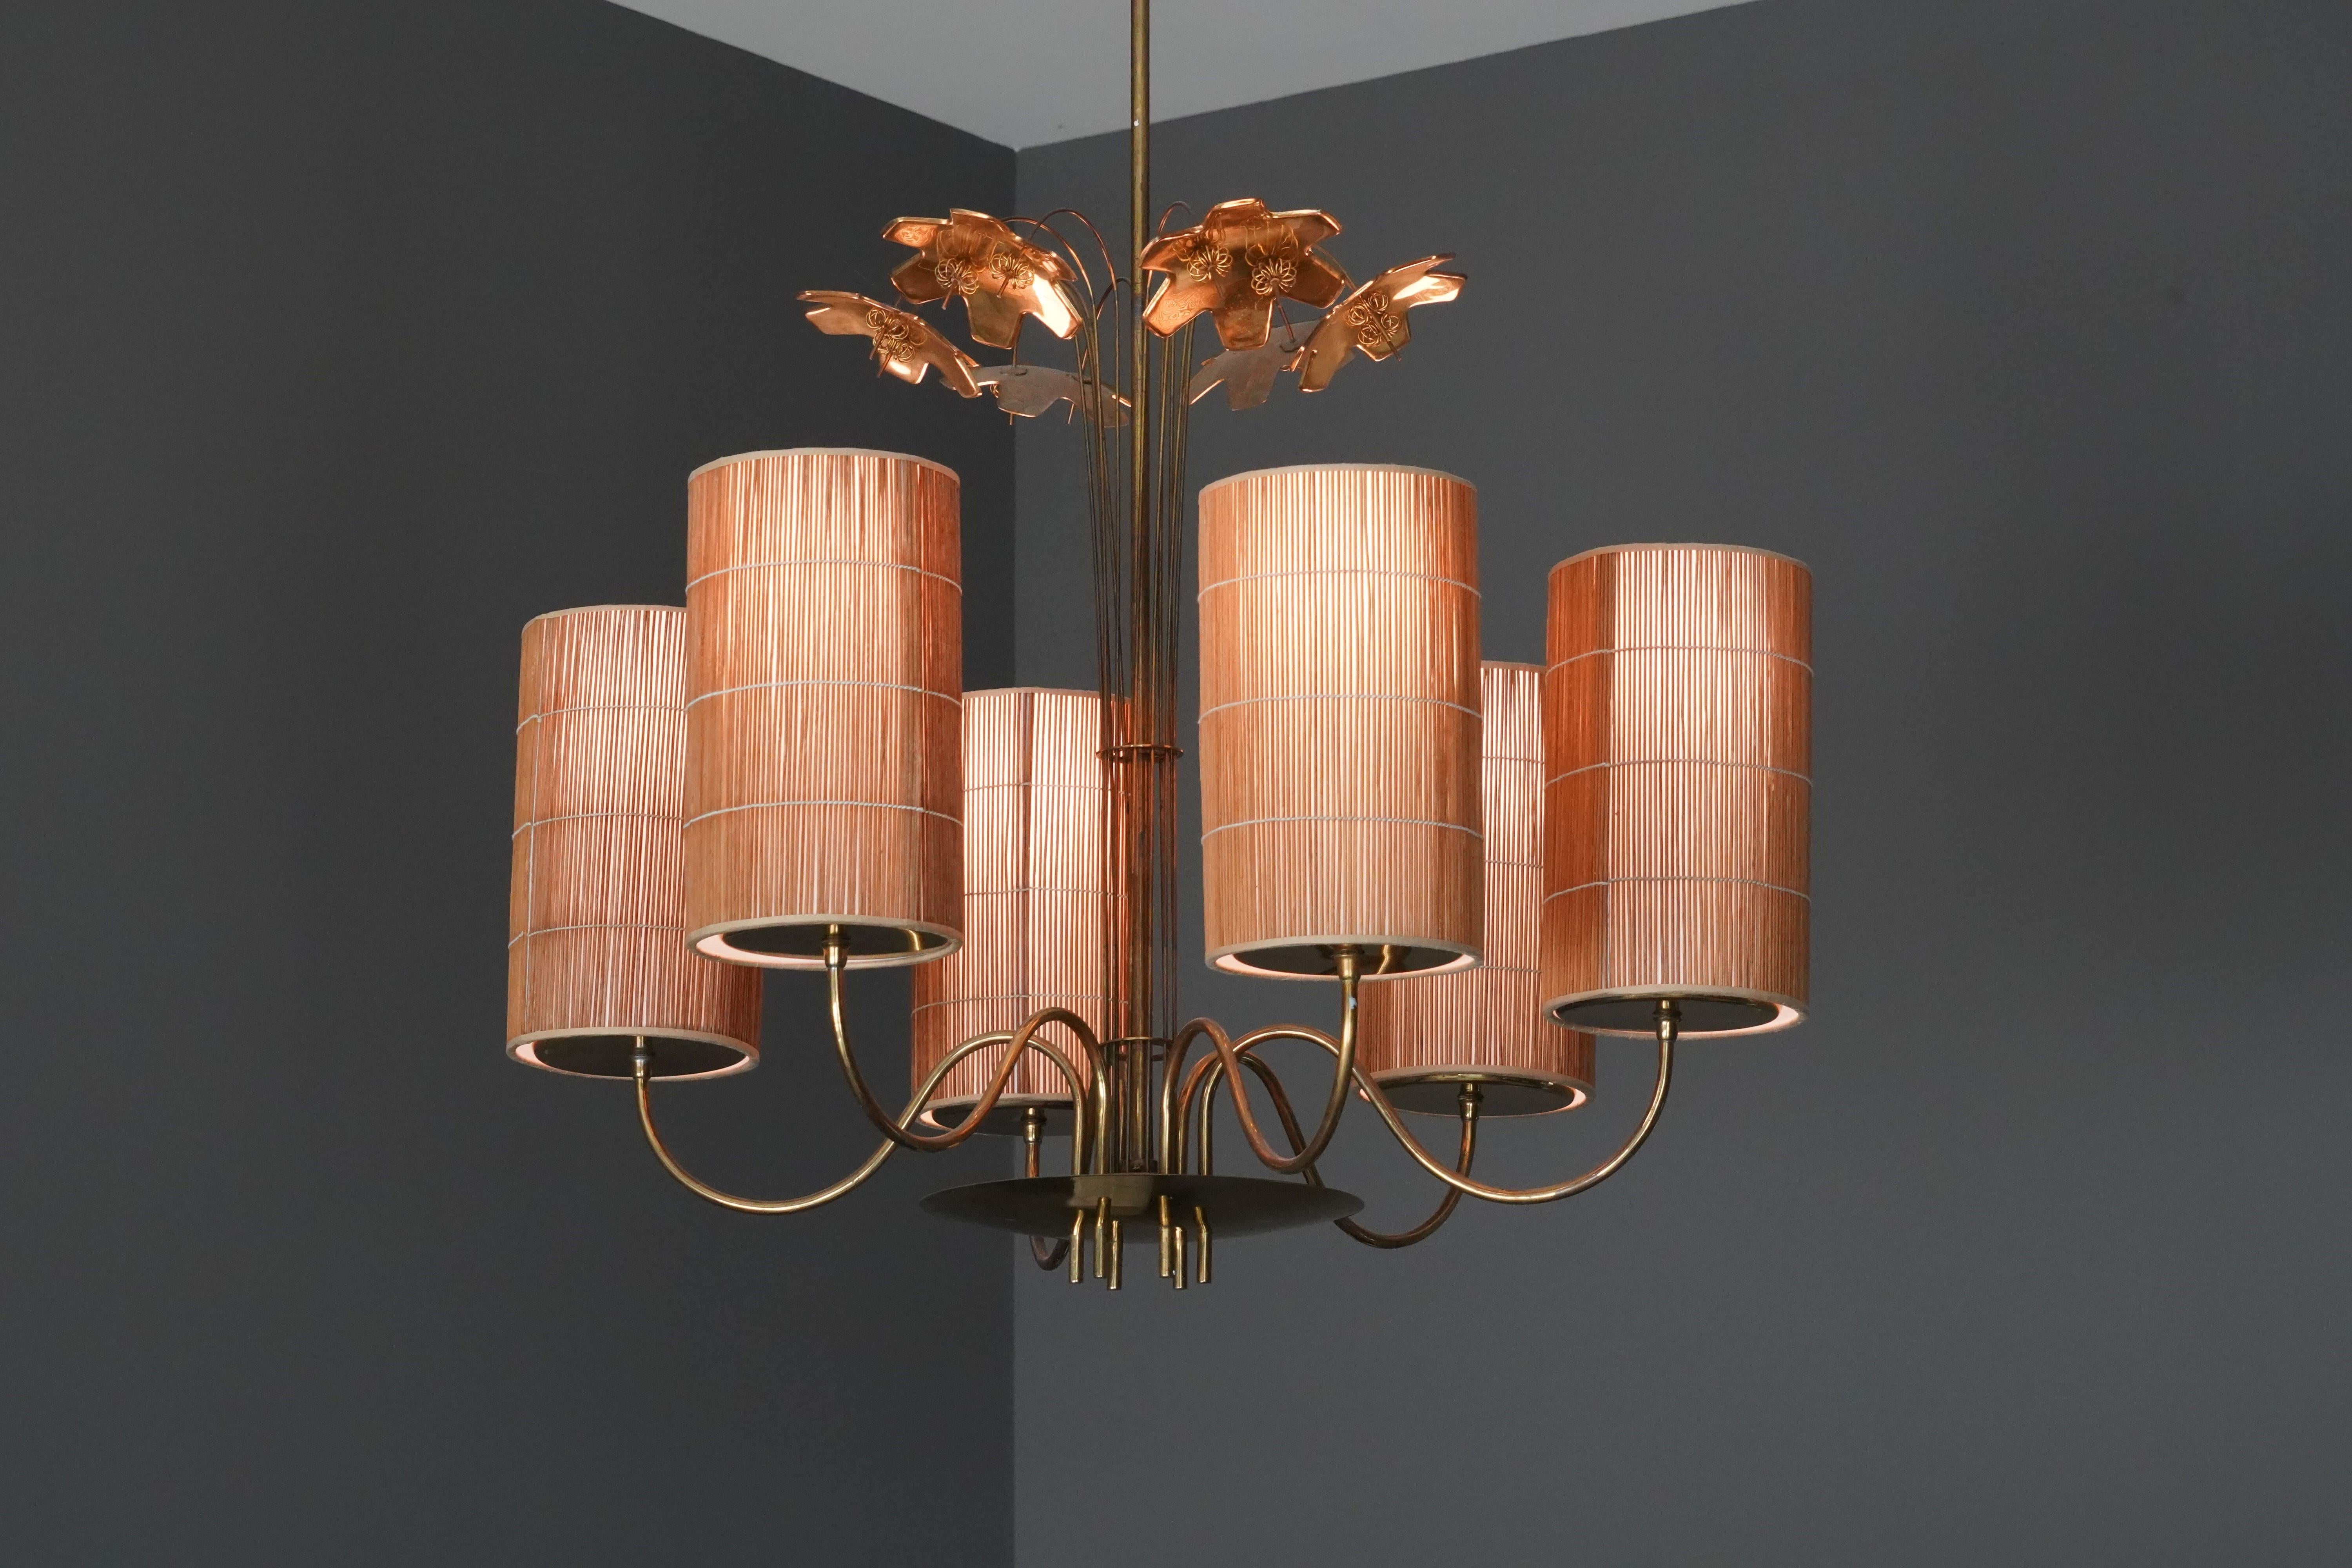 A large chandelier / ceiling lamp in brass by Finnish designer Paavo Tynell. Decorated with six snowflakes. Produced by Tynell's firm, Taito OY. Handmade reed shades of later production. Six light sources.

Starting as a jewelry designer, Paavo